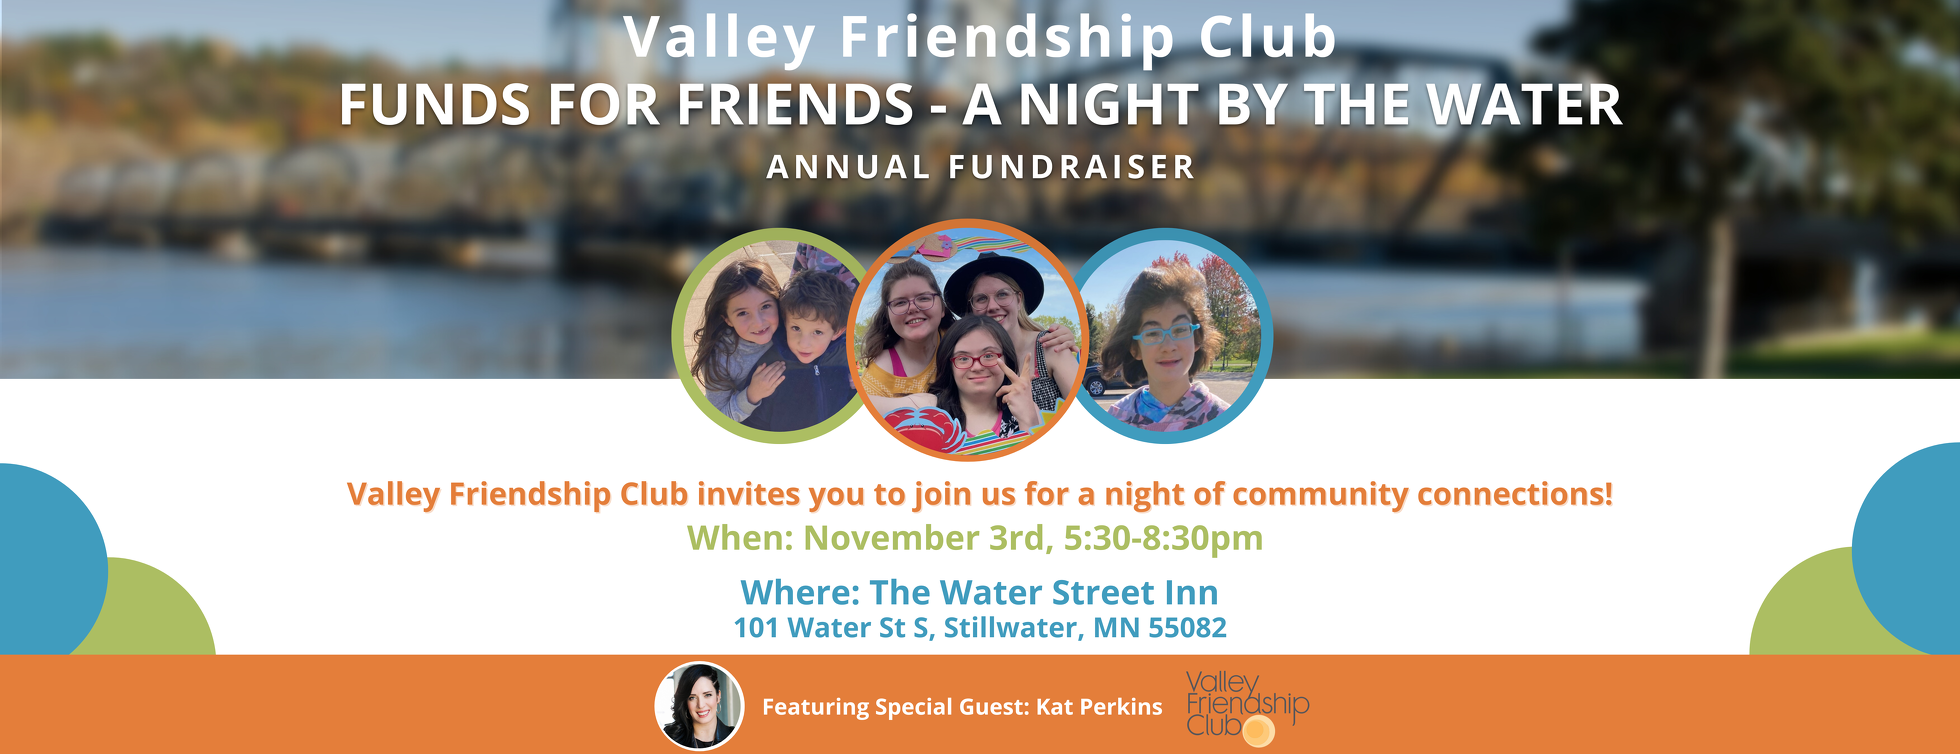 VFC Funds for Friends - A Night by the Water 2022